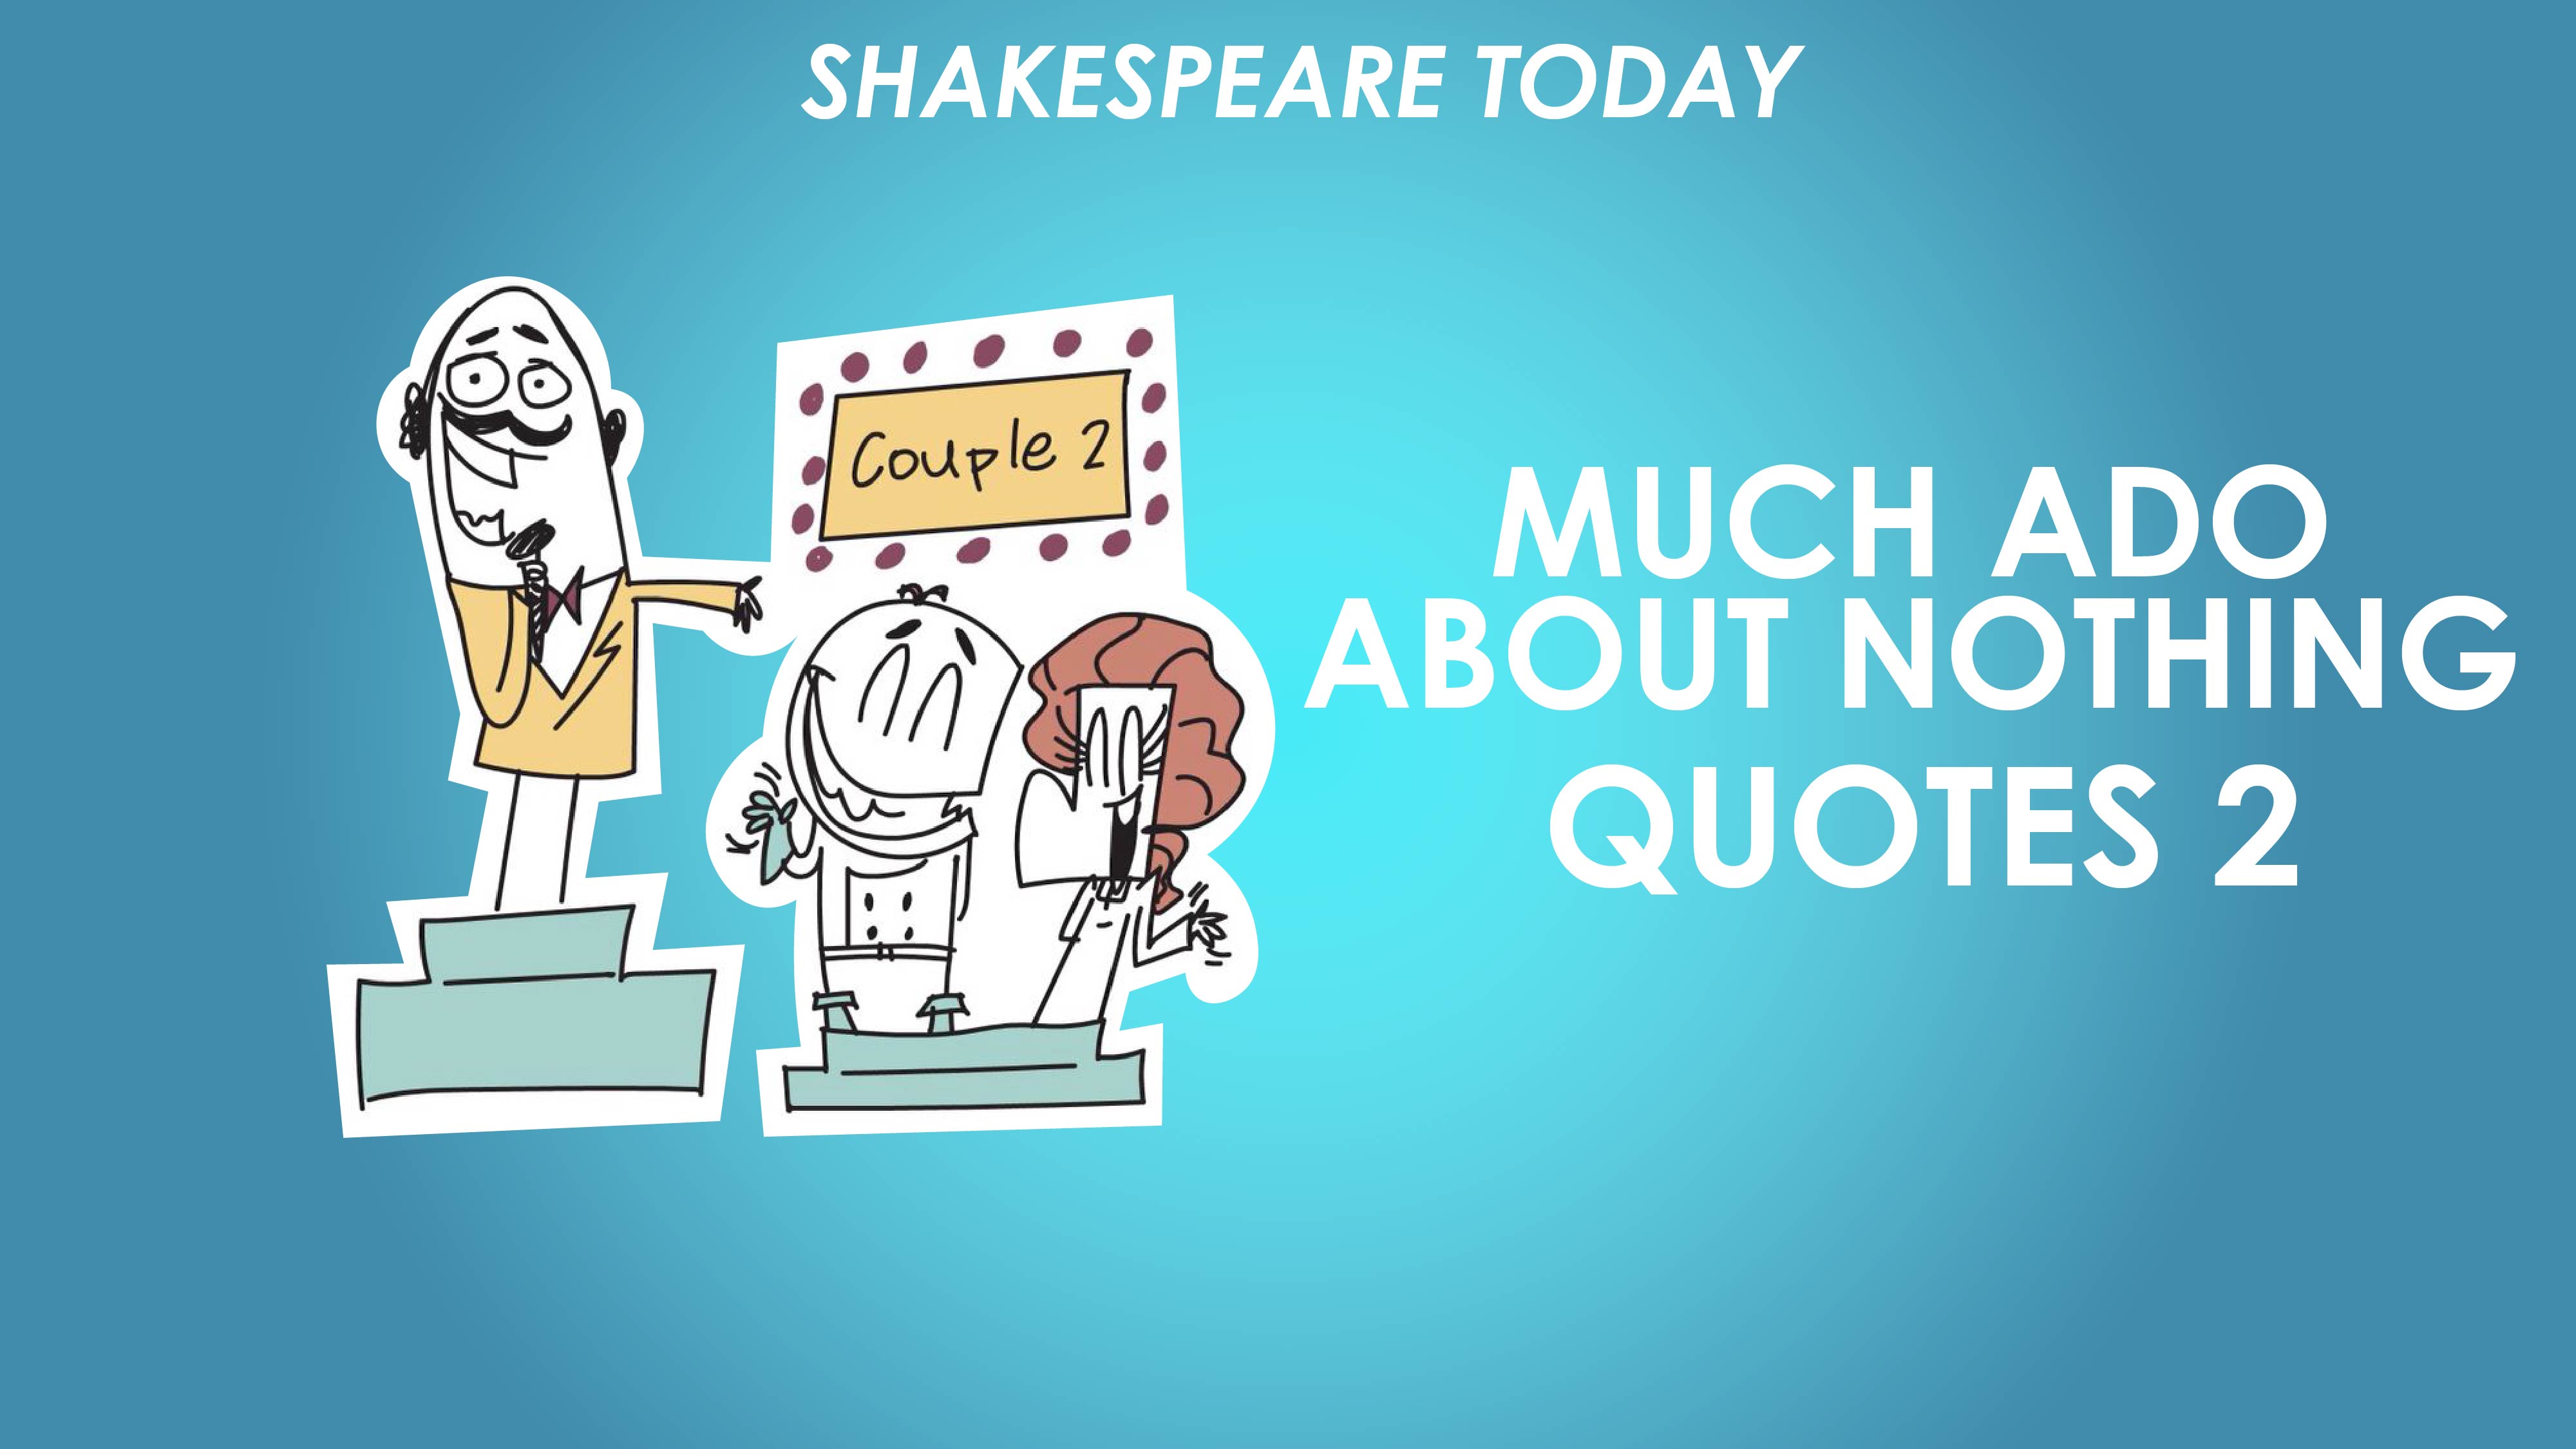 Much Ado About Nothing Key Quotes Analysis Part 2 - Shakespeare Today Series